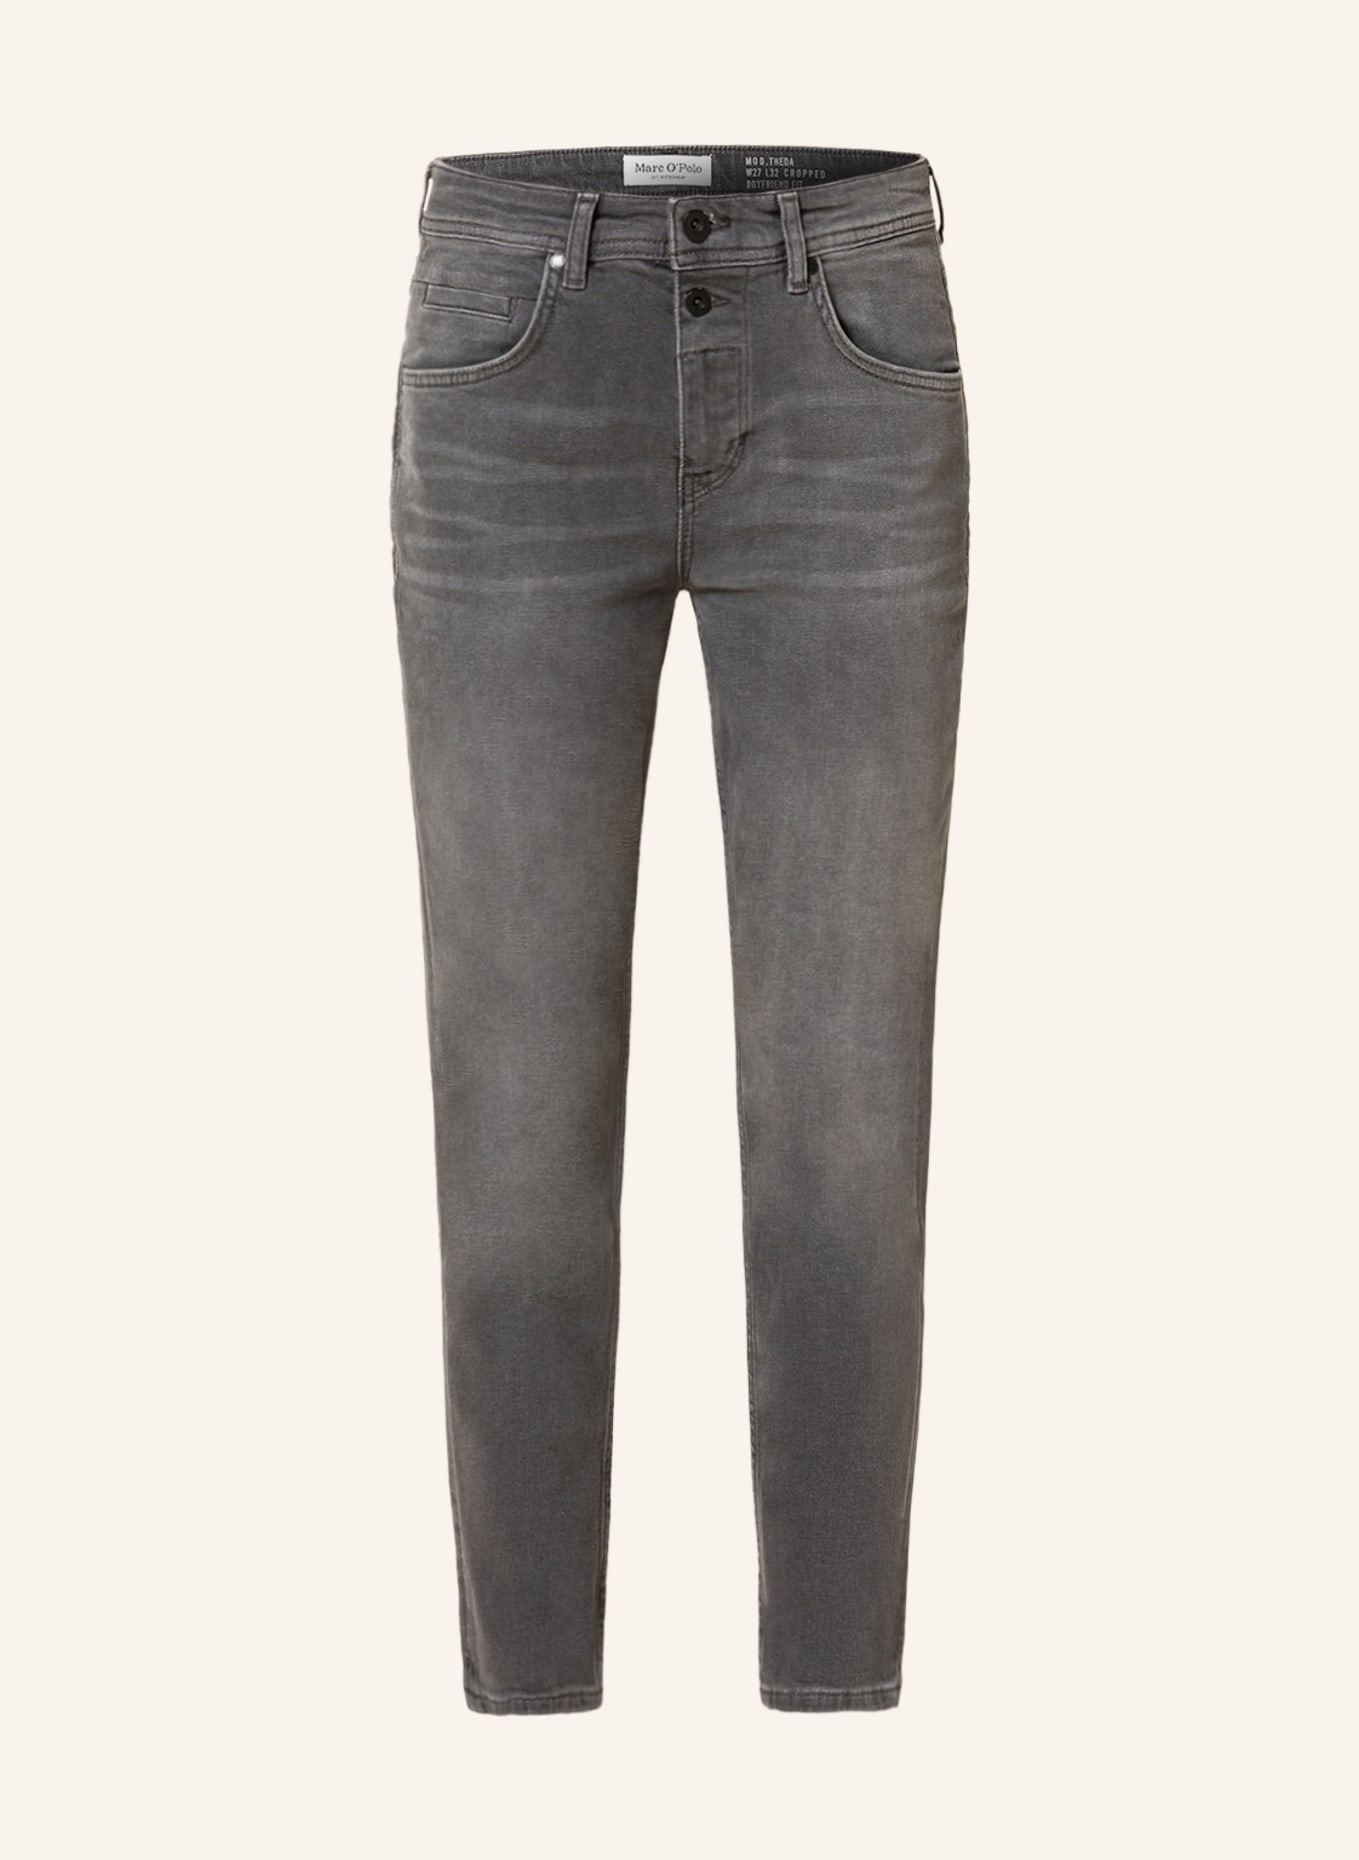 Marc O'Polo 7/8-Jeans THEDA, Farbe: 038 Grey sustainable wash (Bild 1)